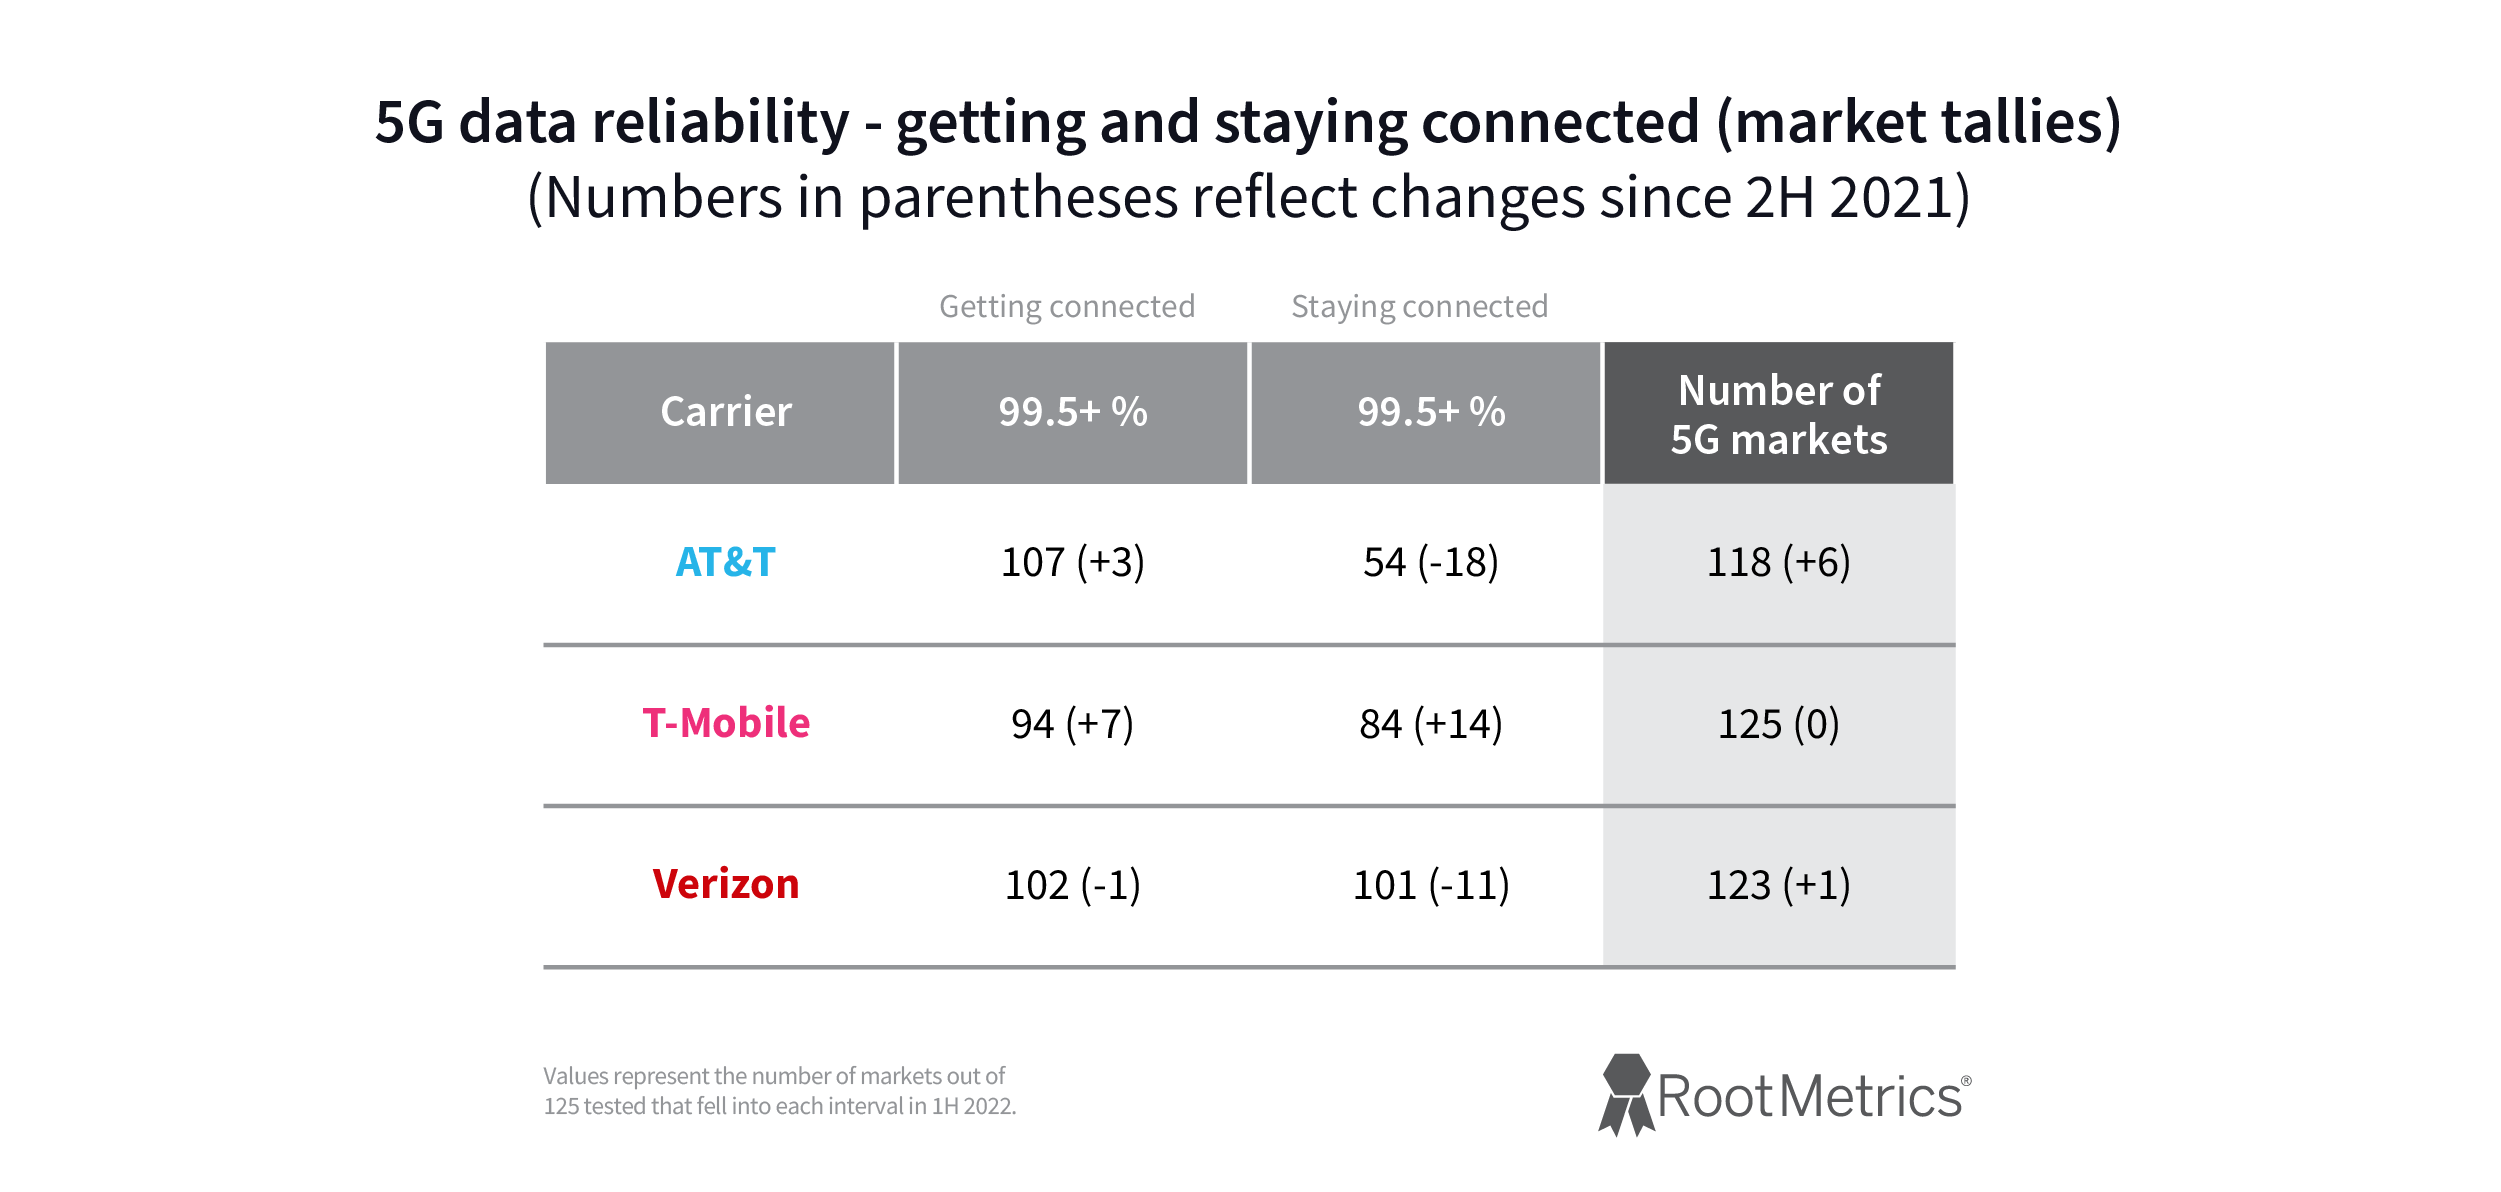 A graphic from RootMetrics showing 5G reliablity